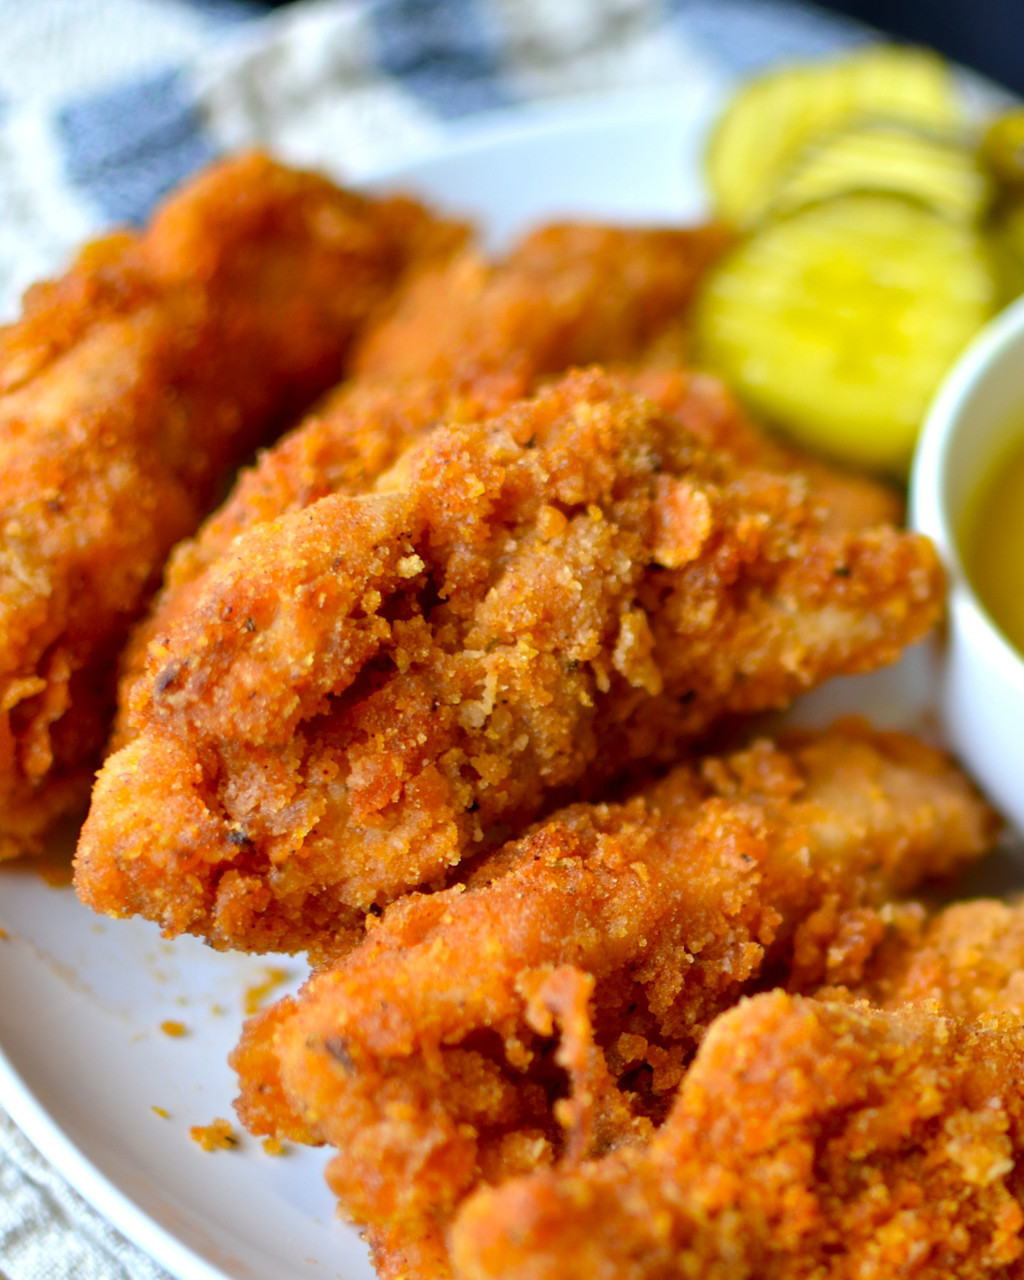 Oven Fried Chicken Recipes
 Yammie s Noshery The Best Oven Fried Chicken Ever with